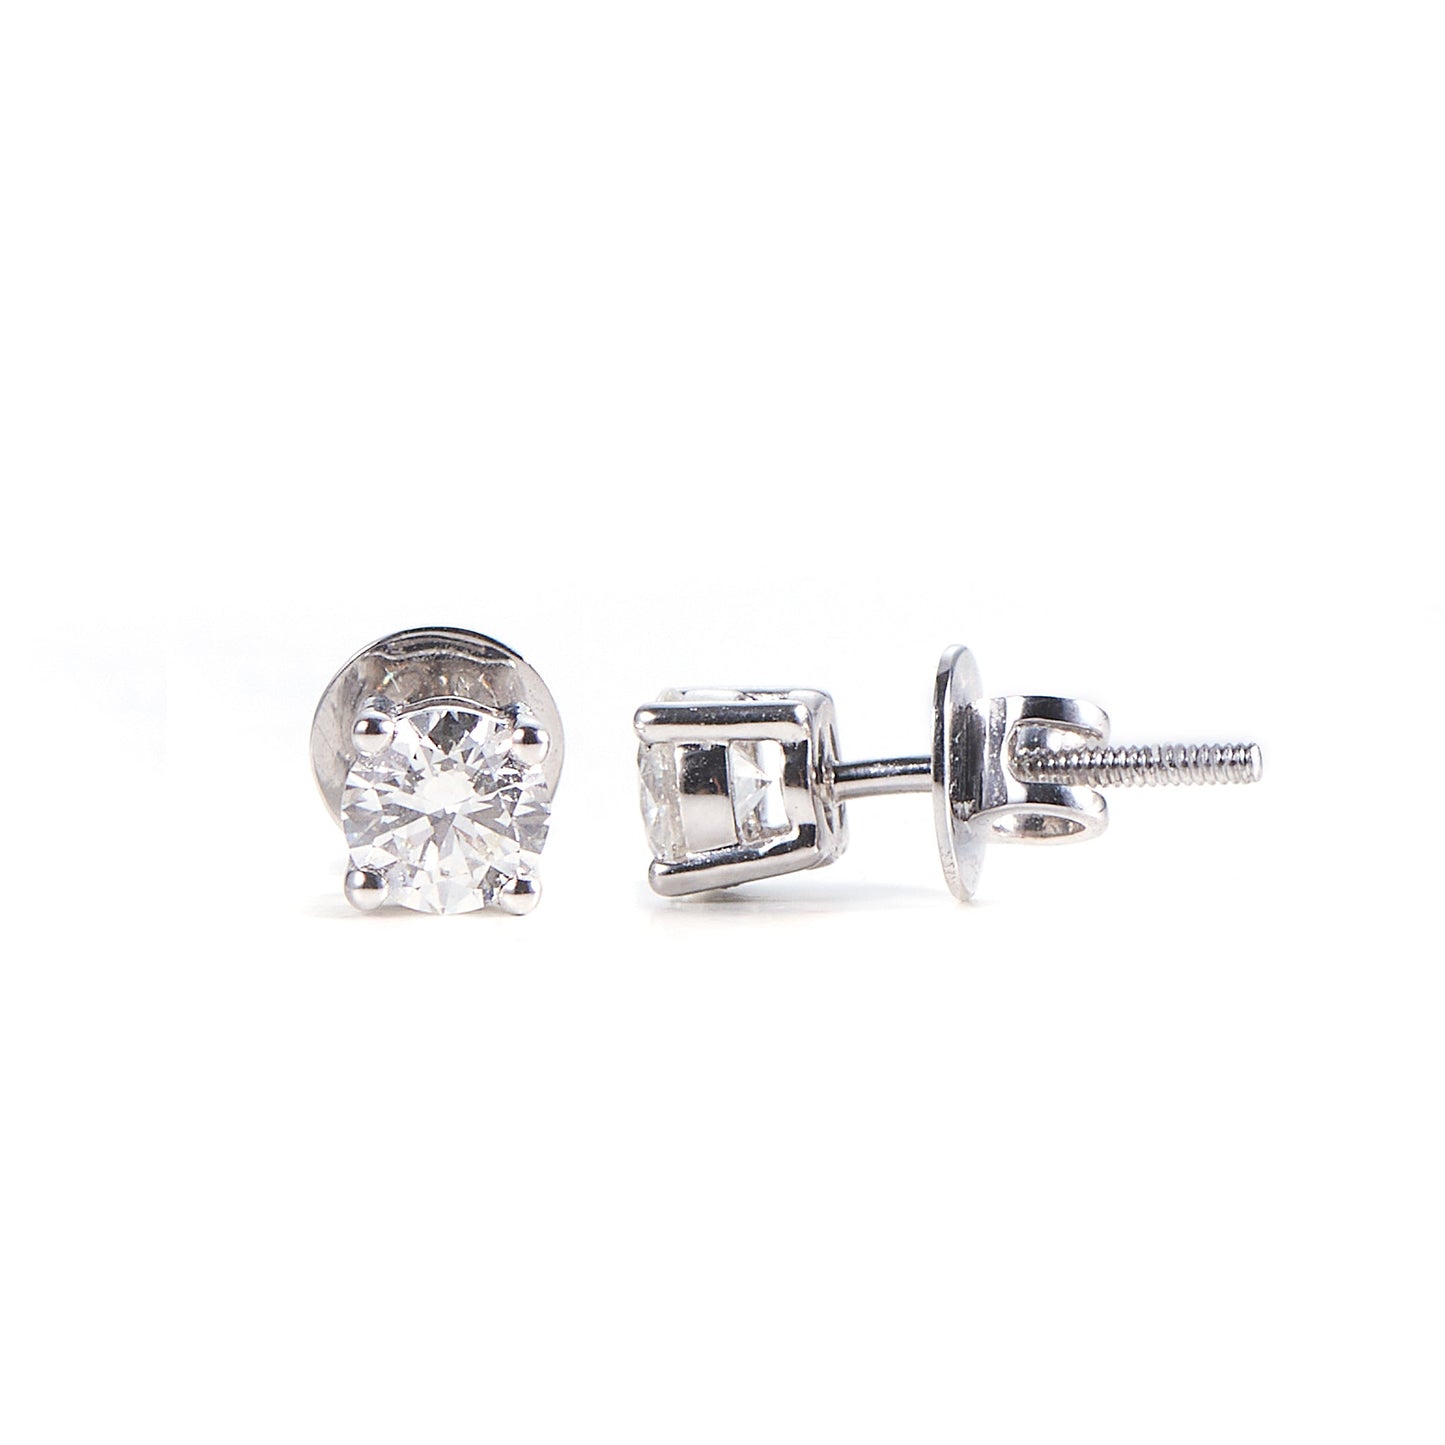 SOLITAIRE STUDS WITH 0.60 CRTS DIAMONDS